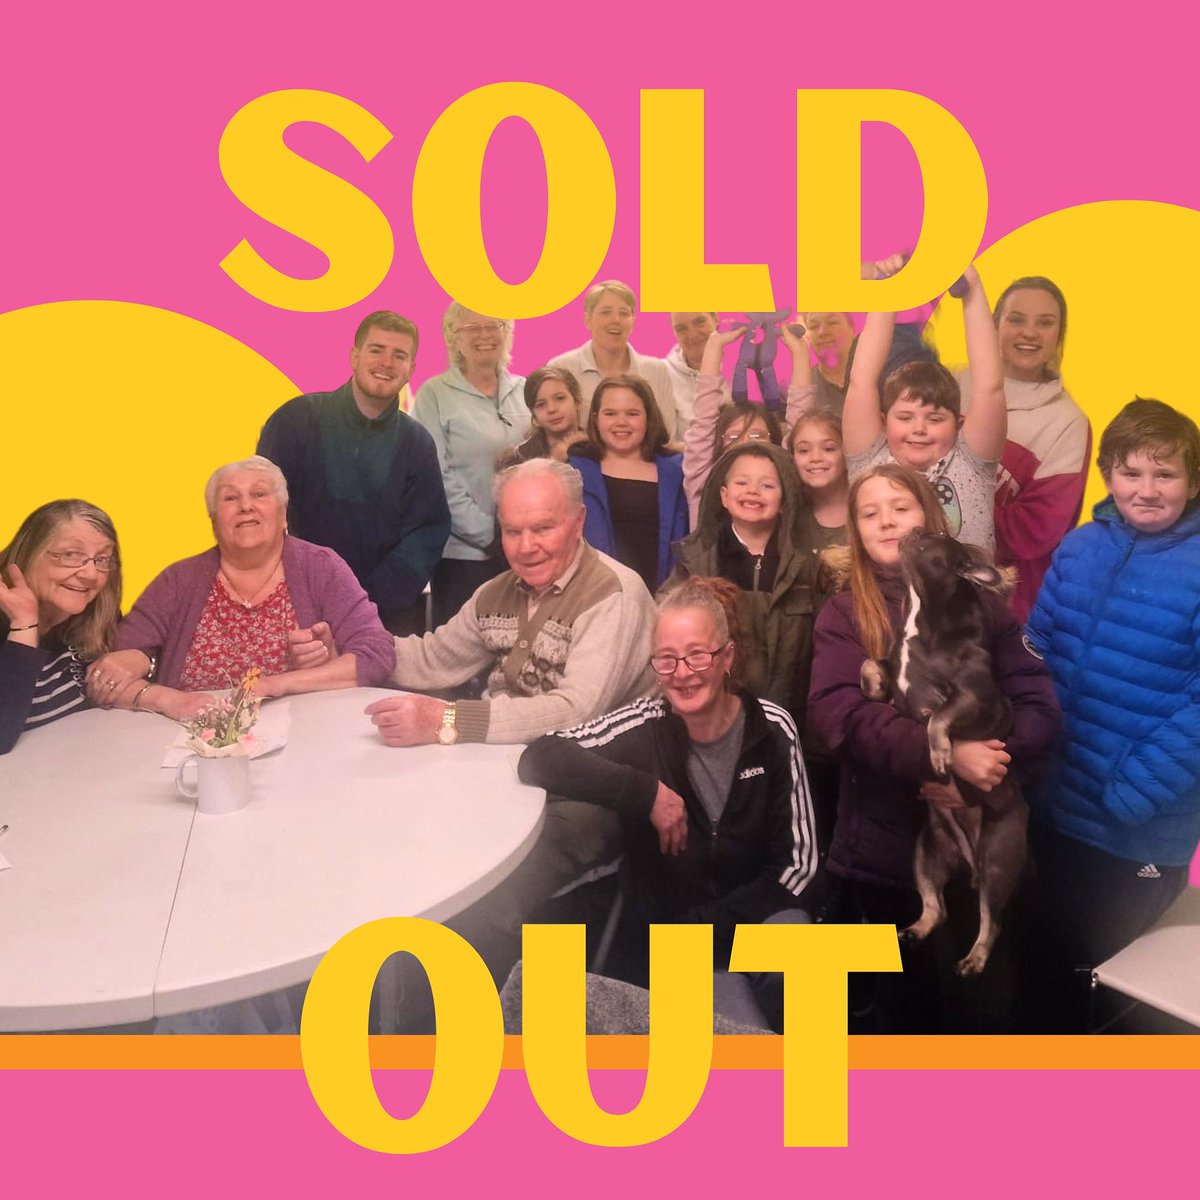 SOLD OUT🎟️ We are blown away and so excited for next week. 200 tickets sold for A Seat At The Table! Our first rehearsal is on Monday and we can’t wait to bring together all 20 of our cast members to start preparing for the staged reading on Thursday🩷